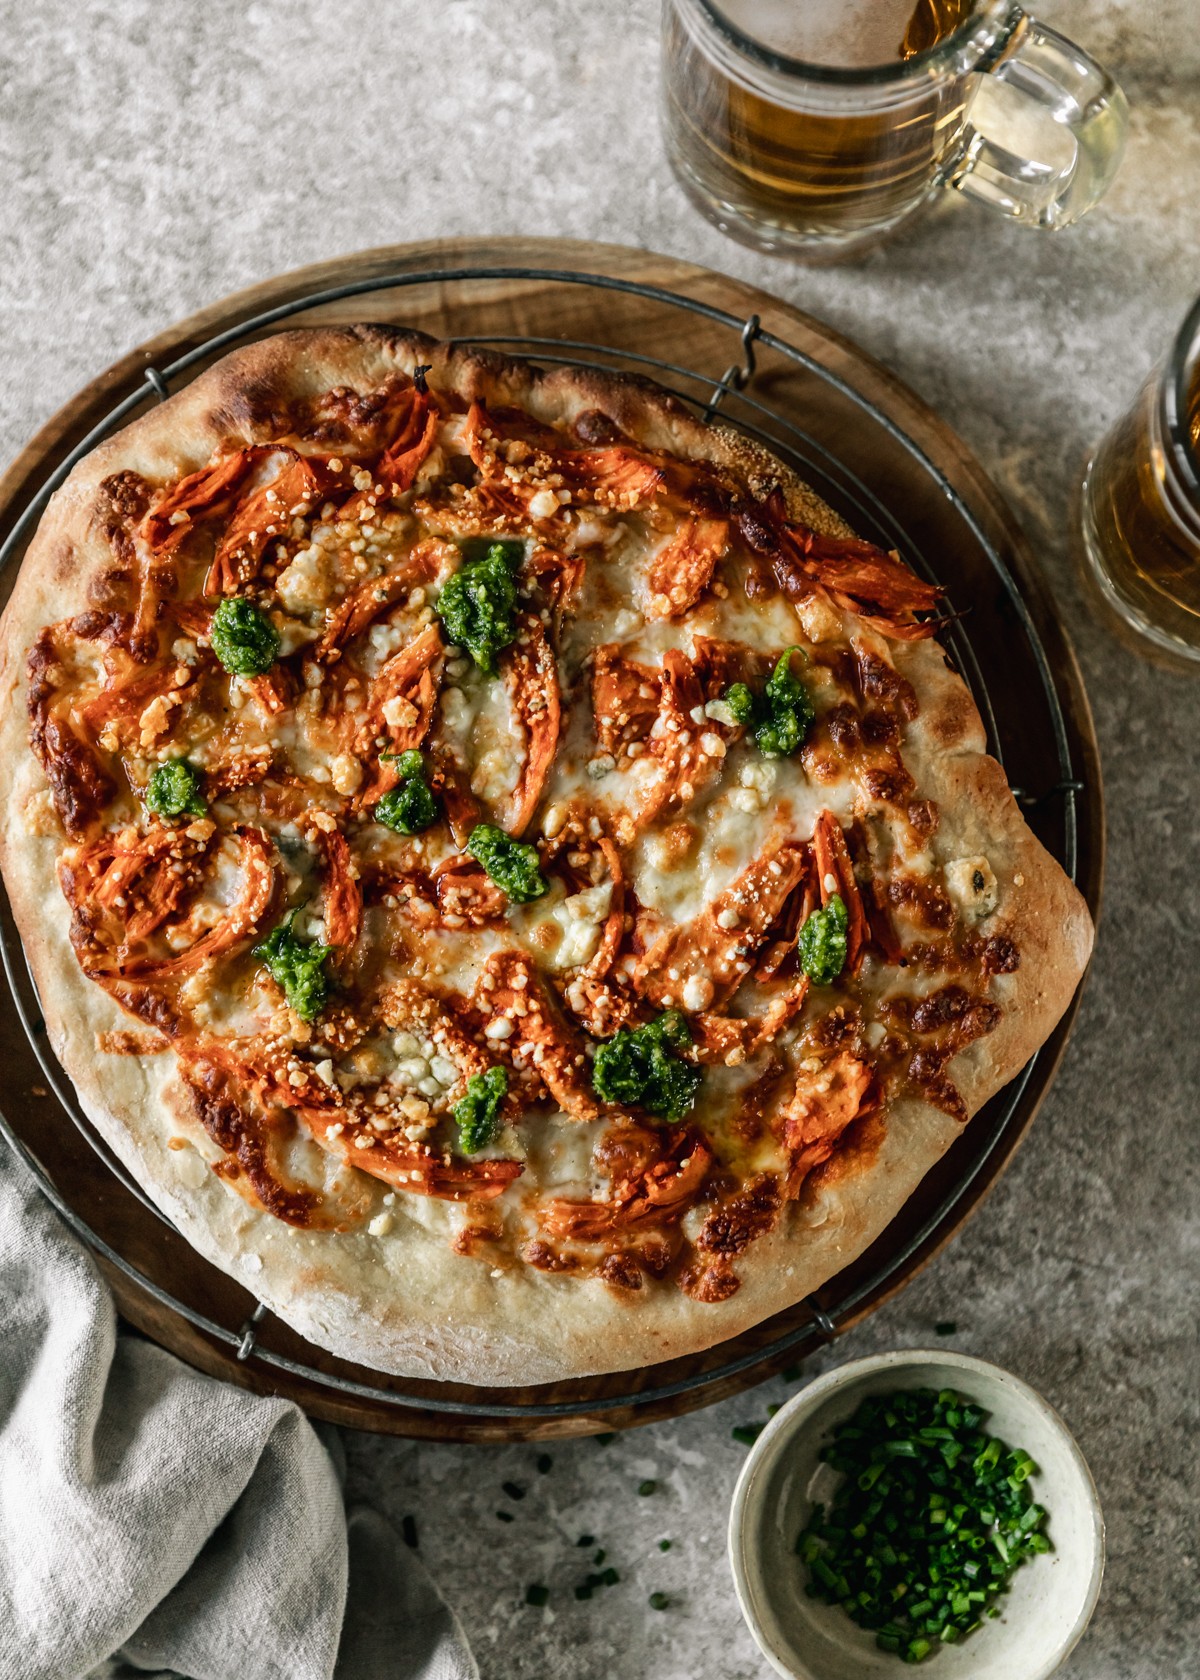 An overhead image of a buffalo chicken pizza with bleu cheese and chive pesto on a vintage cooling rack on a circle wood board placed on a beige table next to a tan linen, white bowl of chives, and cups of beer.